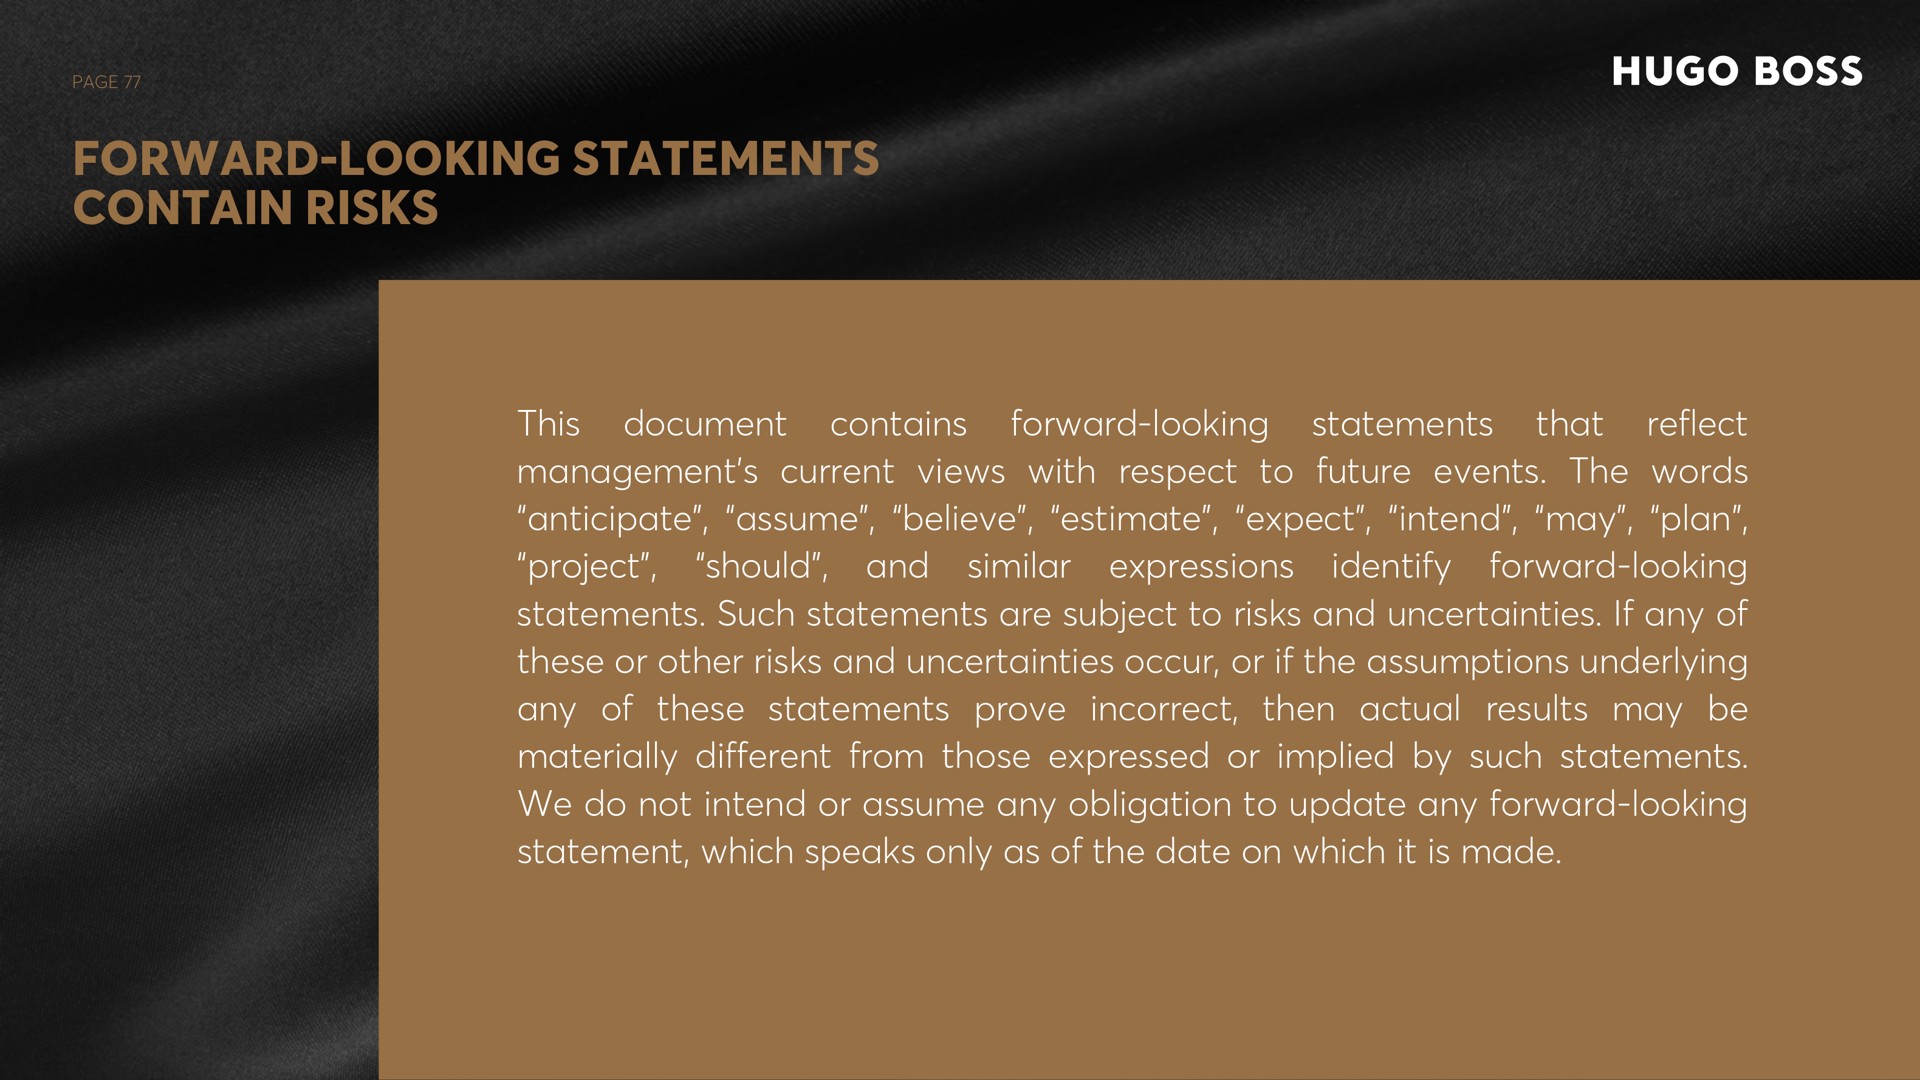 page forward looking statements contain risks that contains forward looking statements should and similar expressions reflect this document management current views with respect to future events the words anticipate assume believe estimate expect intend may plan project forward looking statements such statements are subject to risks and uncertainties if any of these or other risks and uncertainties occur or if the assumptions underlying any of these statements prove incorrect then actual results may be materially different from those expressed or implied by such statements we do not intend or assume any obligation to update any forward looking statement which speaks only as of the date on which it is made identify page | Hugo Boss